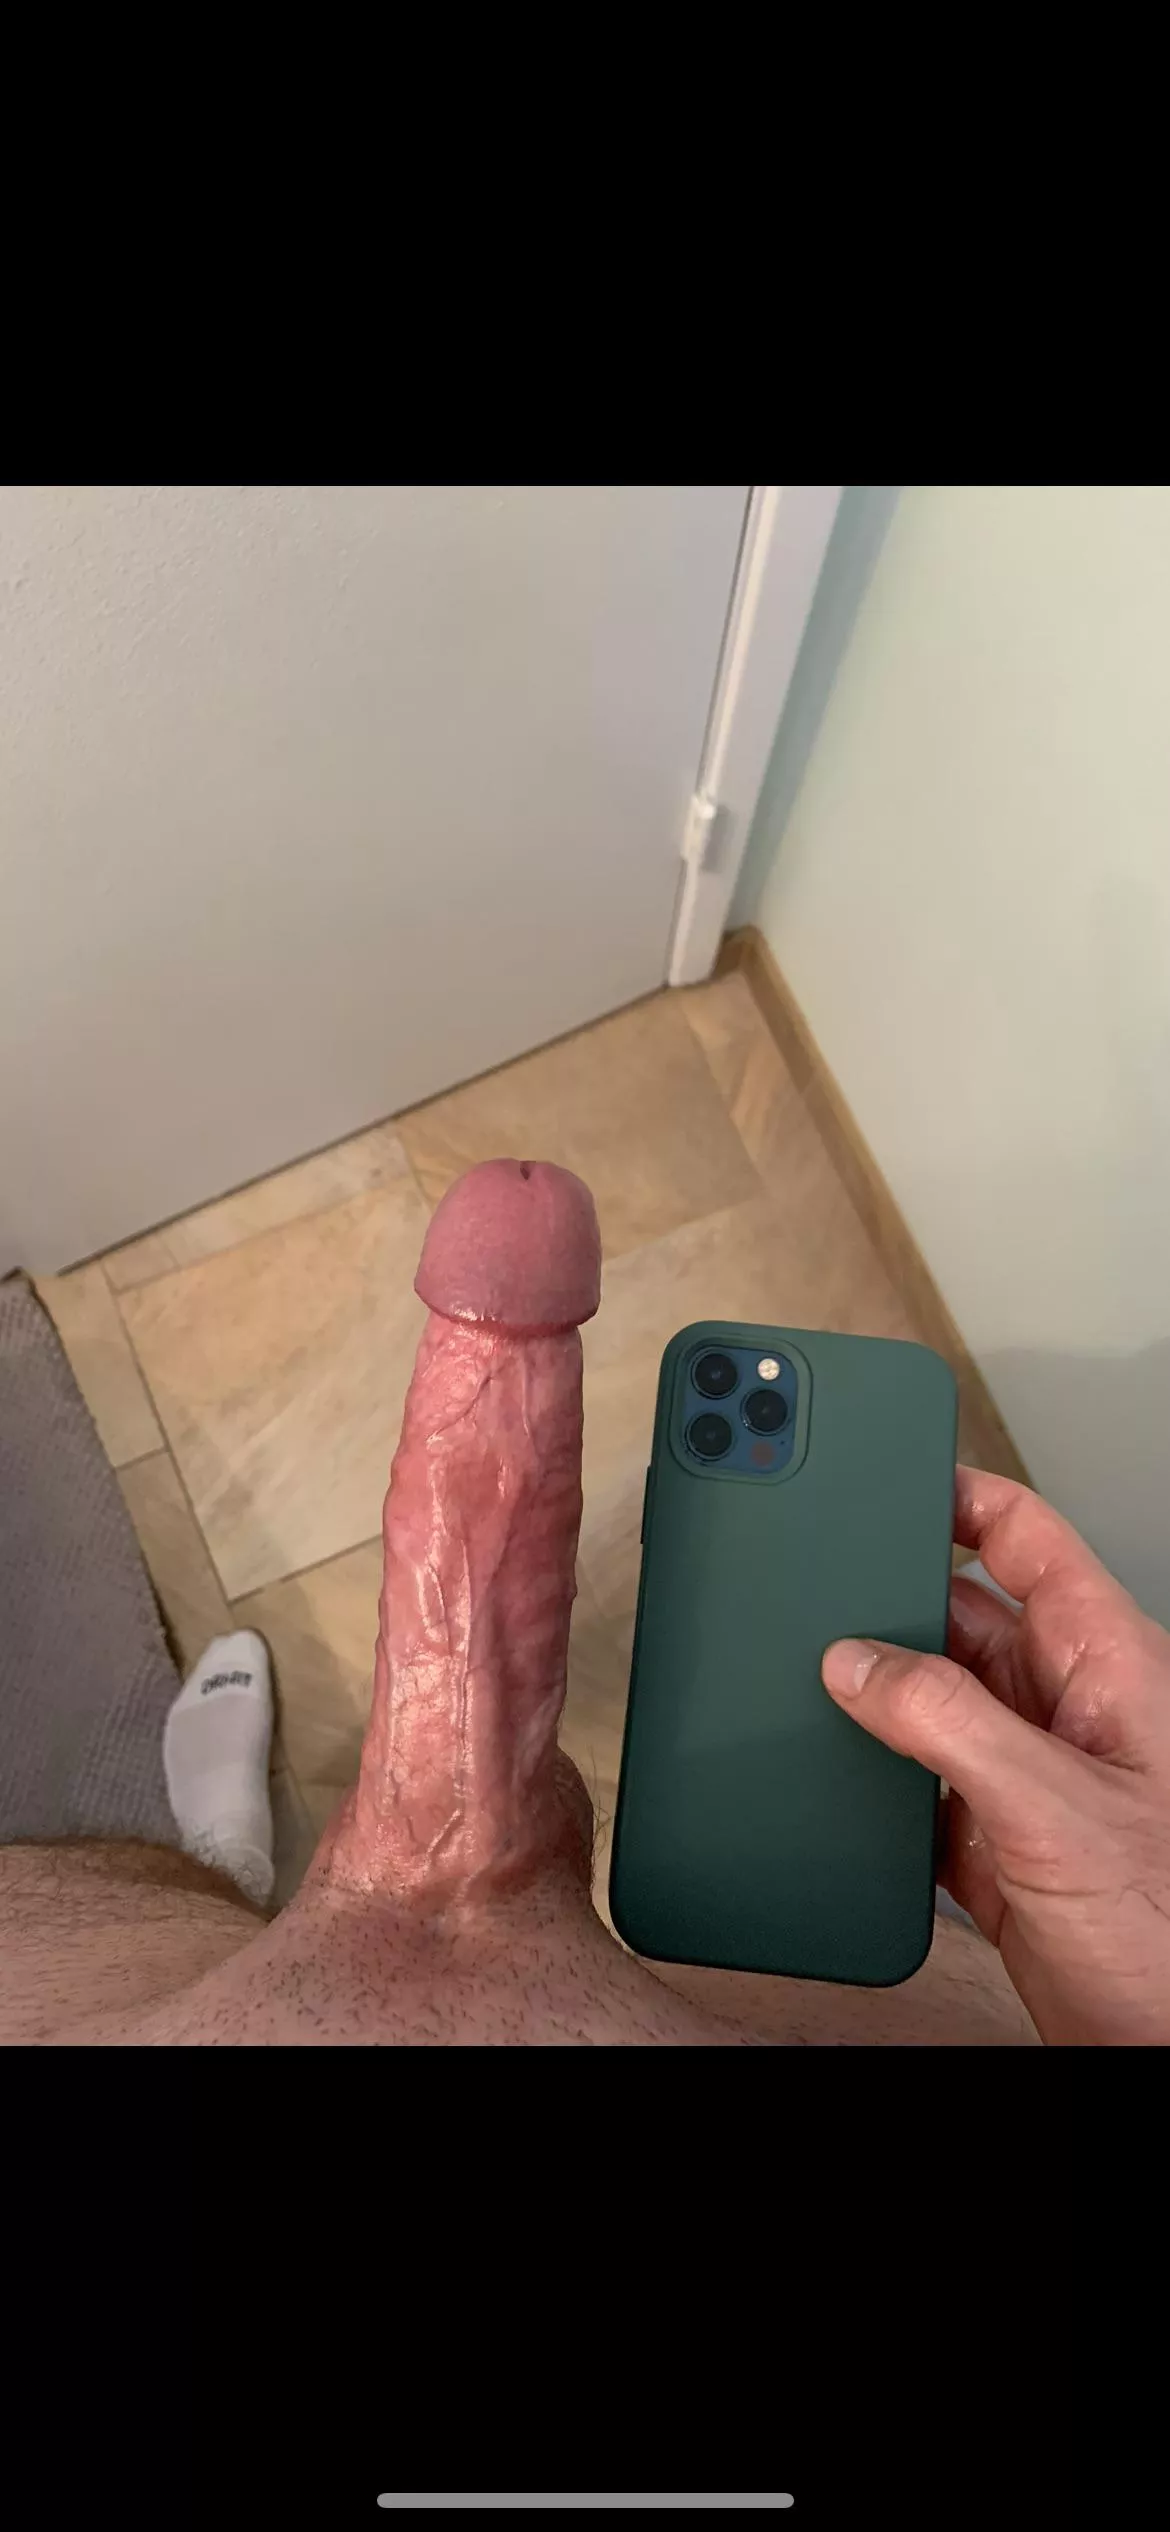 Iphones Are Average If Im Not Mistaken Nudes Cockcompare Nude